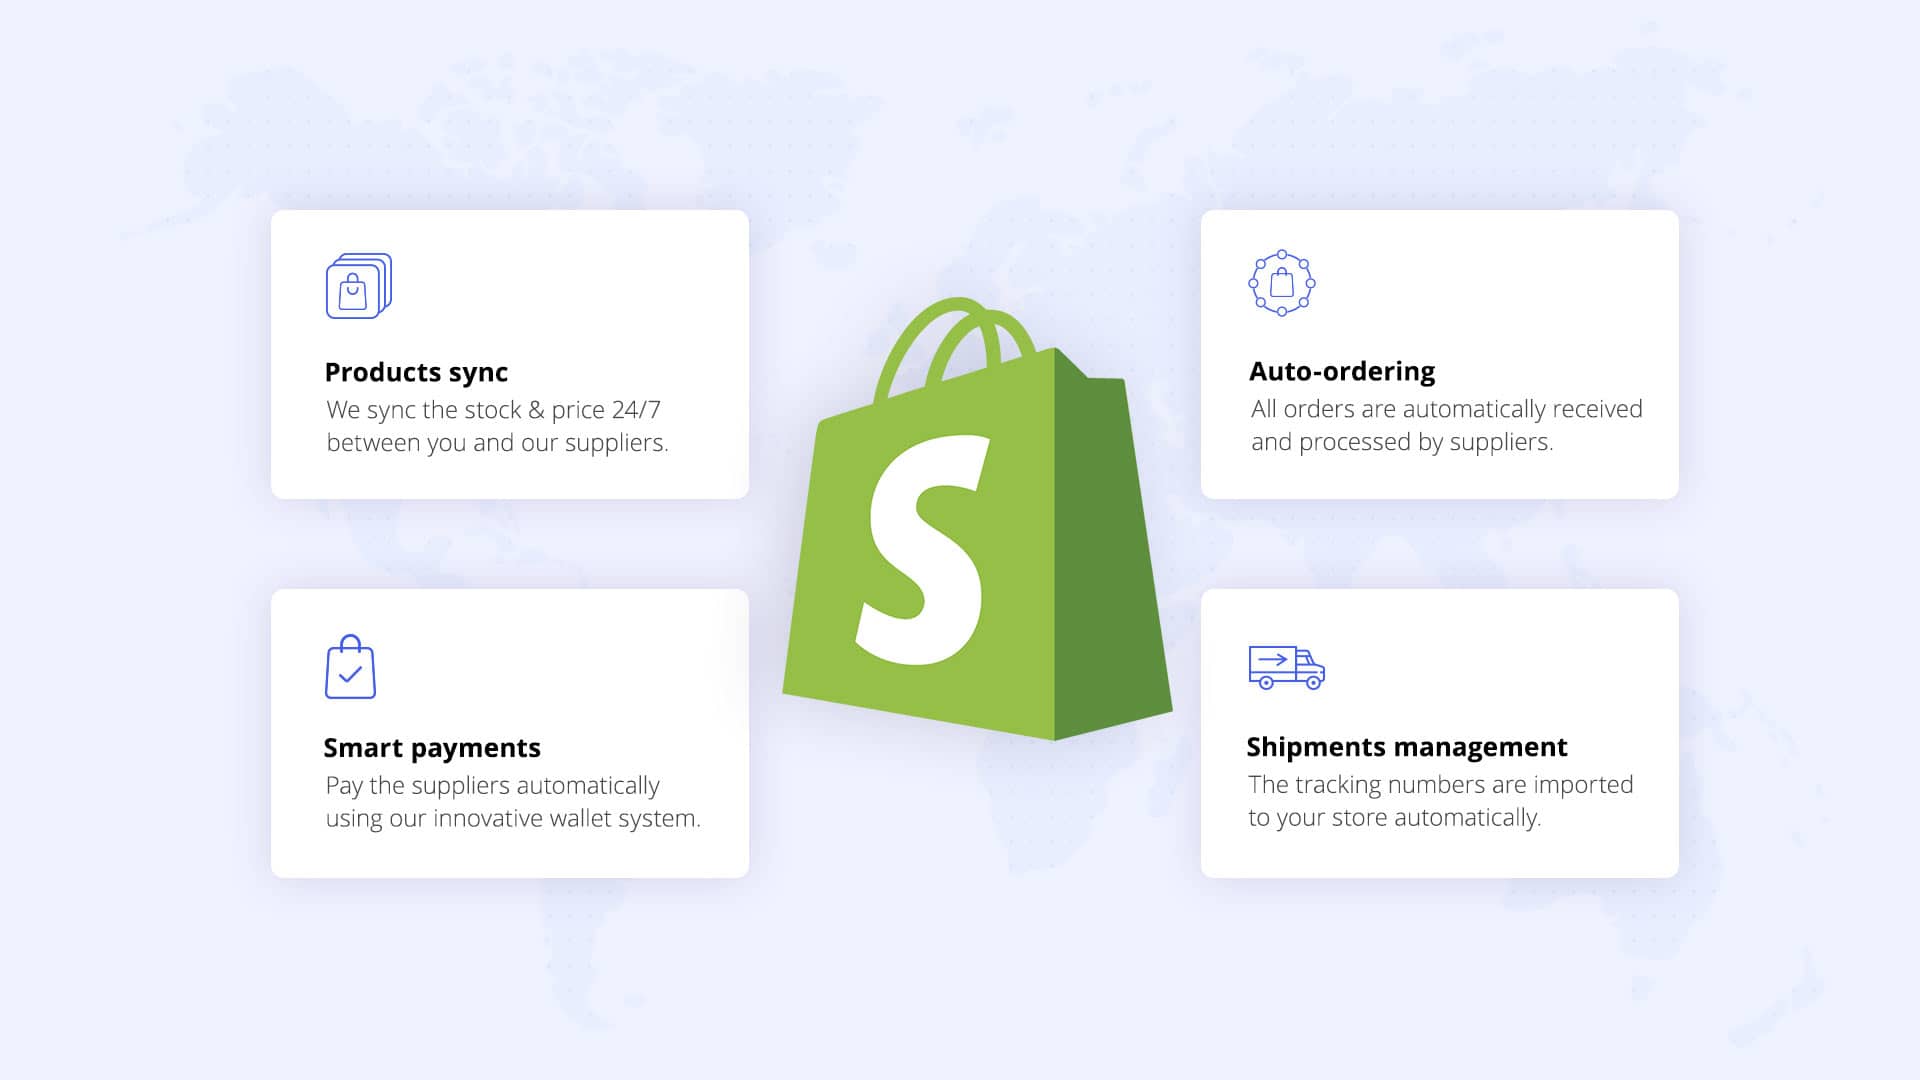 Shopify Flow - Automate everything and get back to business